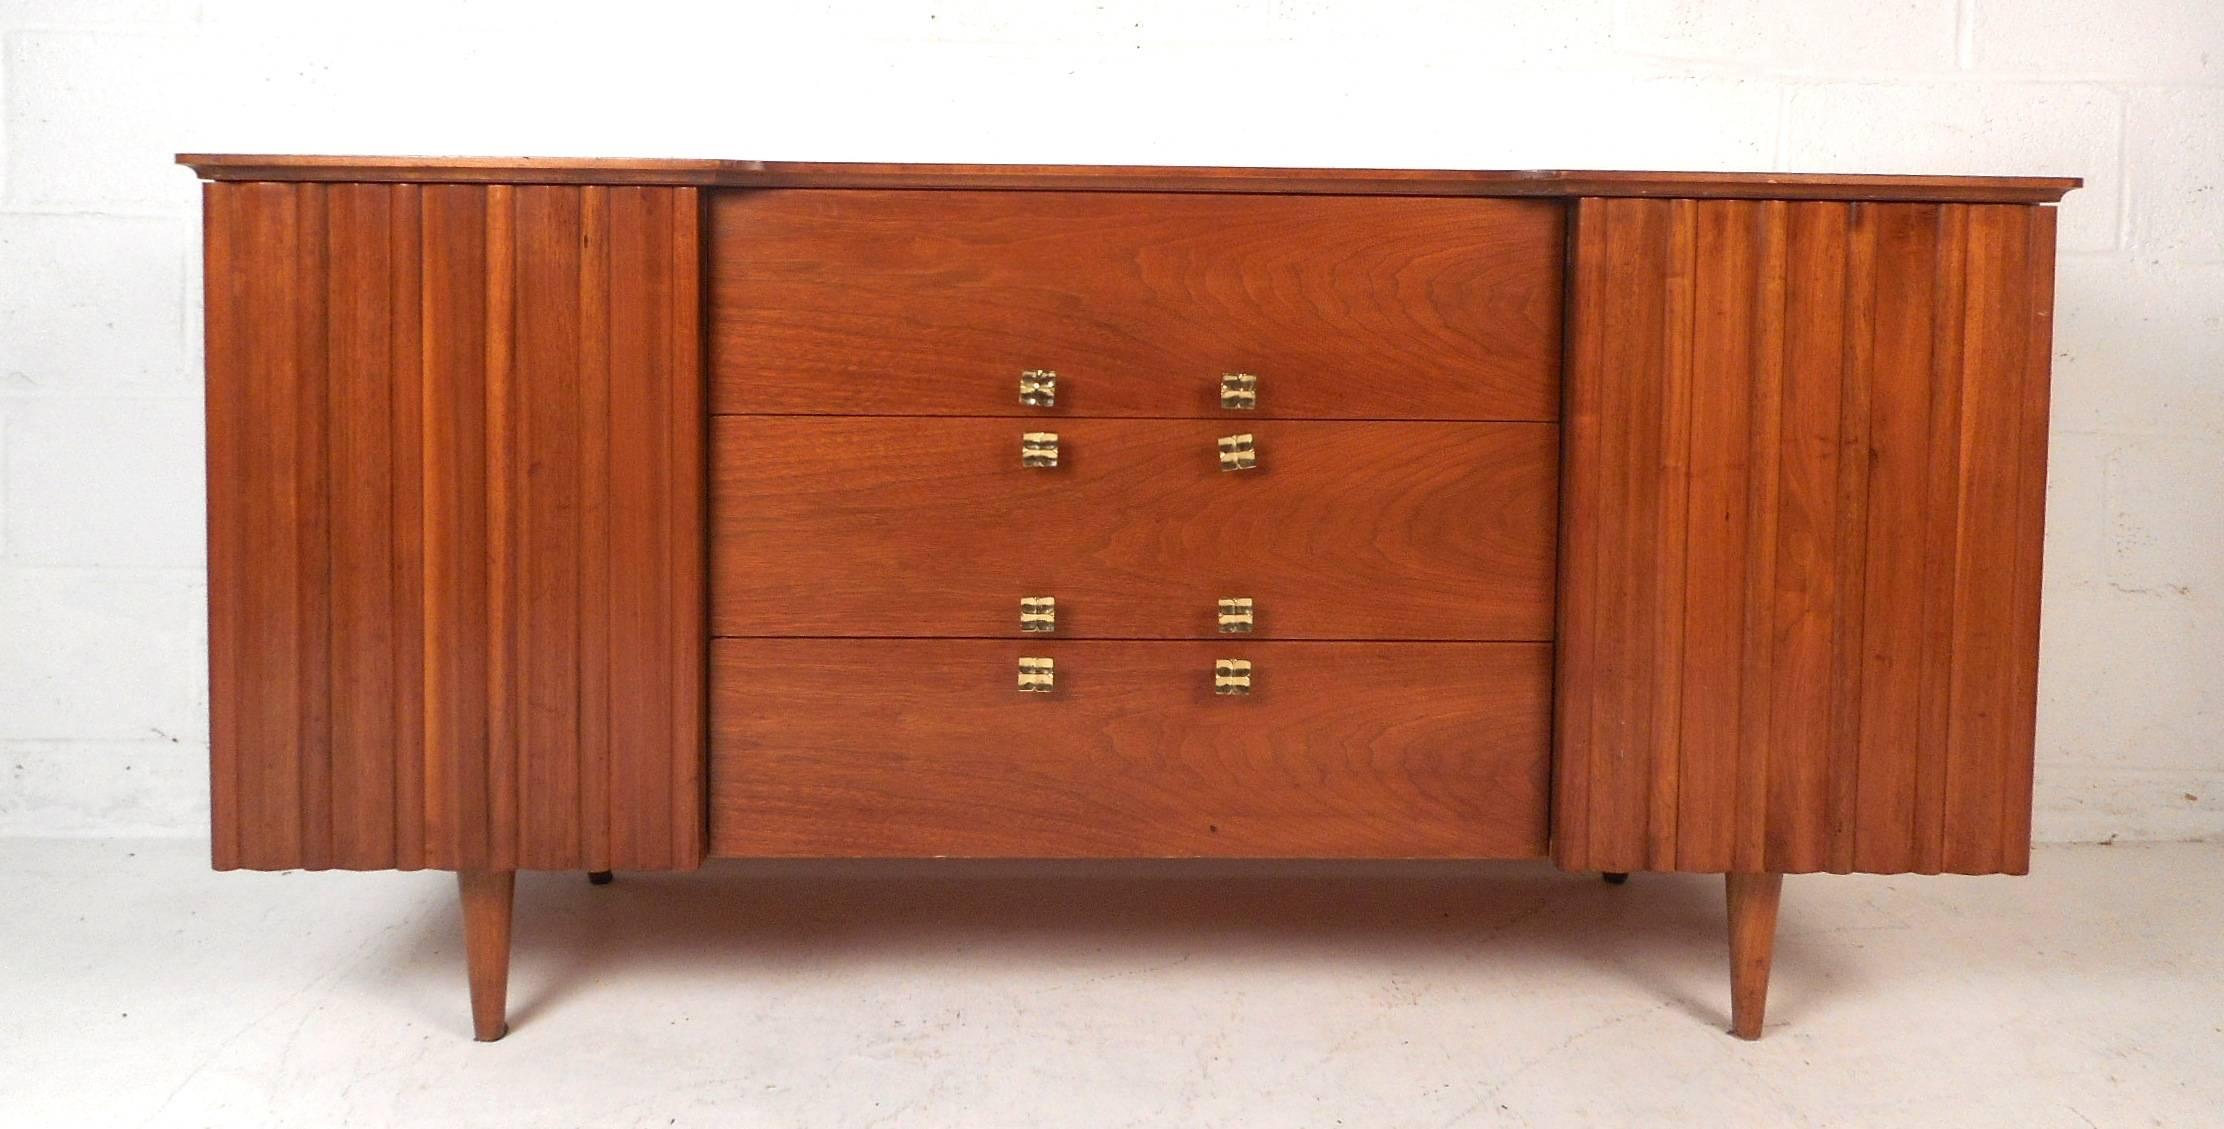 A fabulous vintage modern walnut credenza with two compartments hidden by cabinet doors, one hidden drawer, and three large drawers in the middle. This beautiful piece features unusual metal pulls, a sculpted top, and tapered legs. The cabinet doors